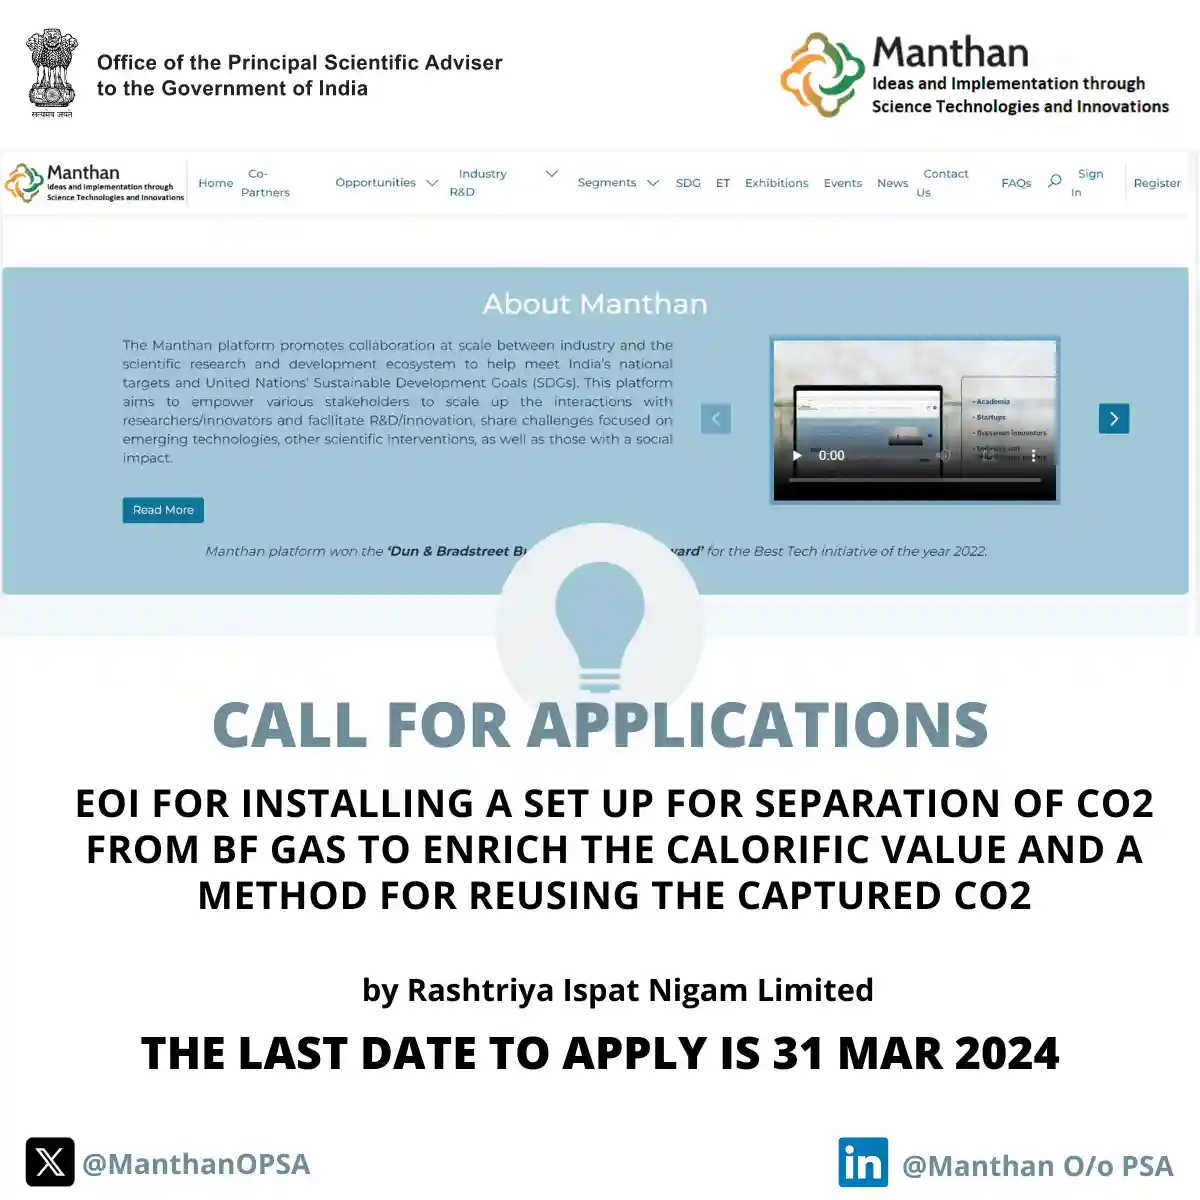 EOI for installing a set up for separation of CO2 from BF gas by Rashtriya Ispat Nigam Limited